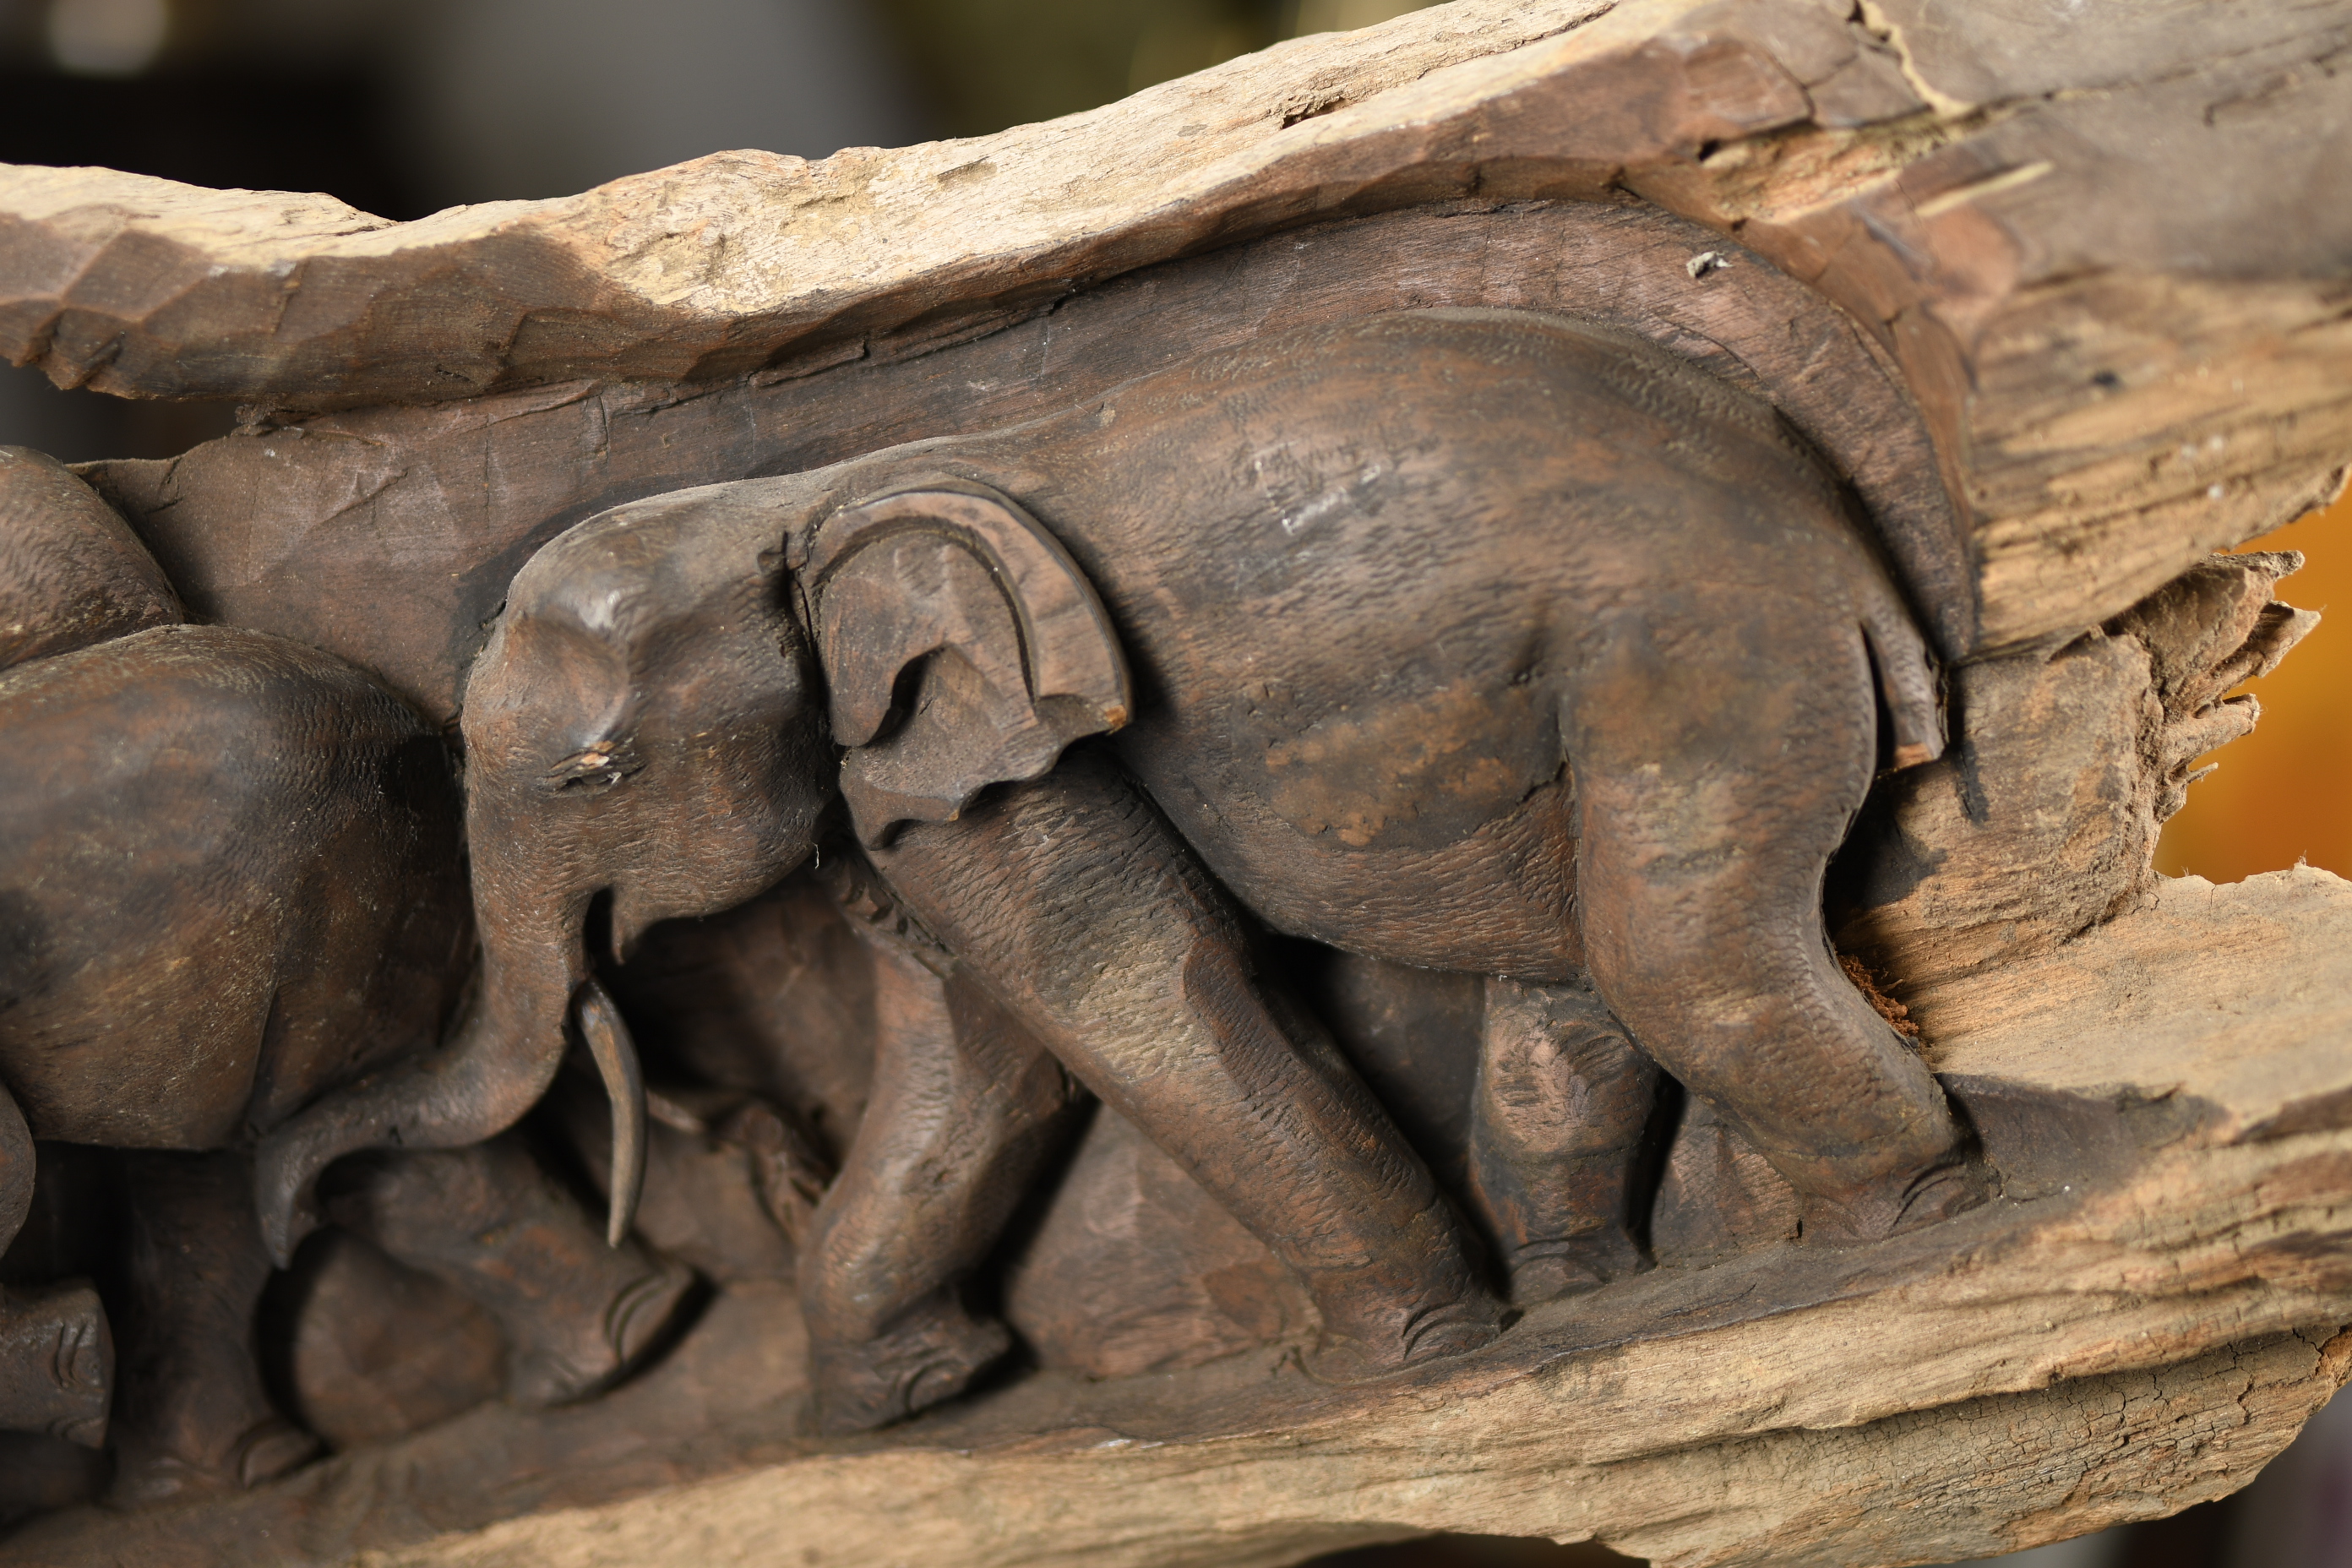 Amazing 4ft Hand carved Wooden Elephant Sculpture. Carved from One Piece of Wood. - Image 6 of 9